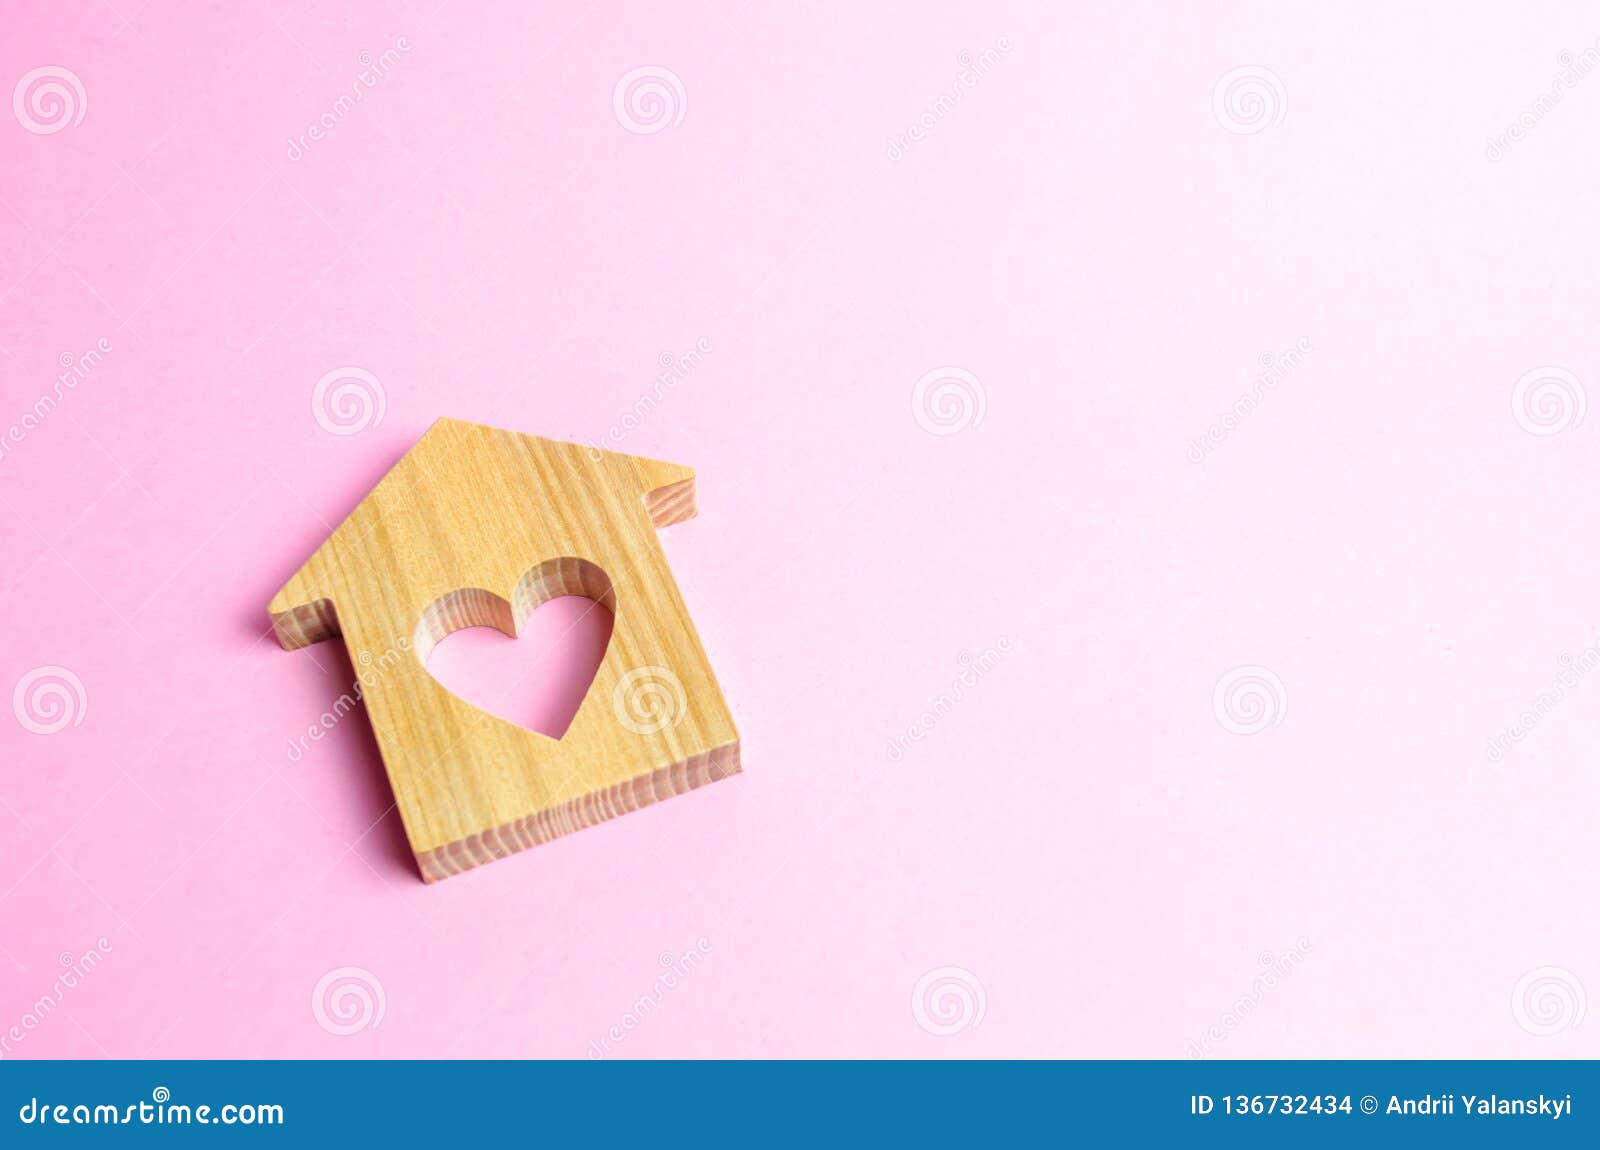 house with a heart on a pink background. the concept of finding a rental house or apartment for a romantic pastime.